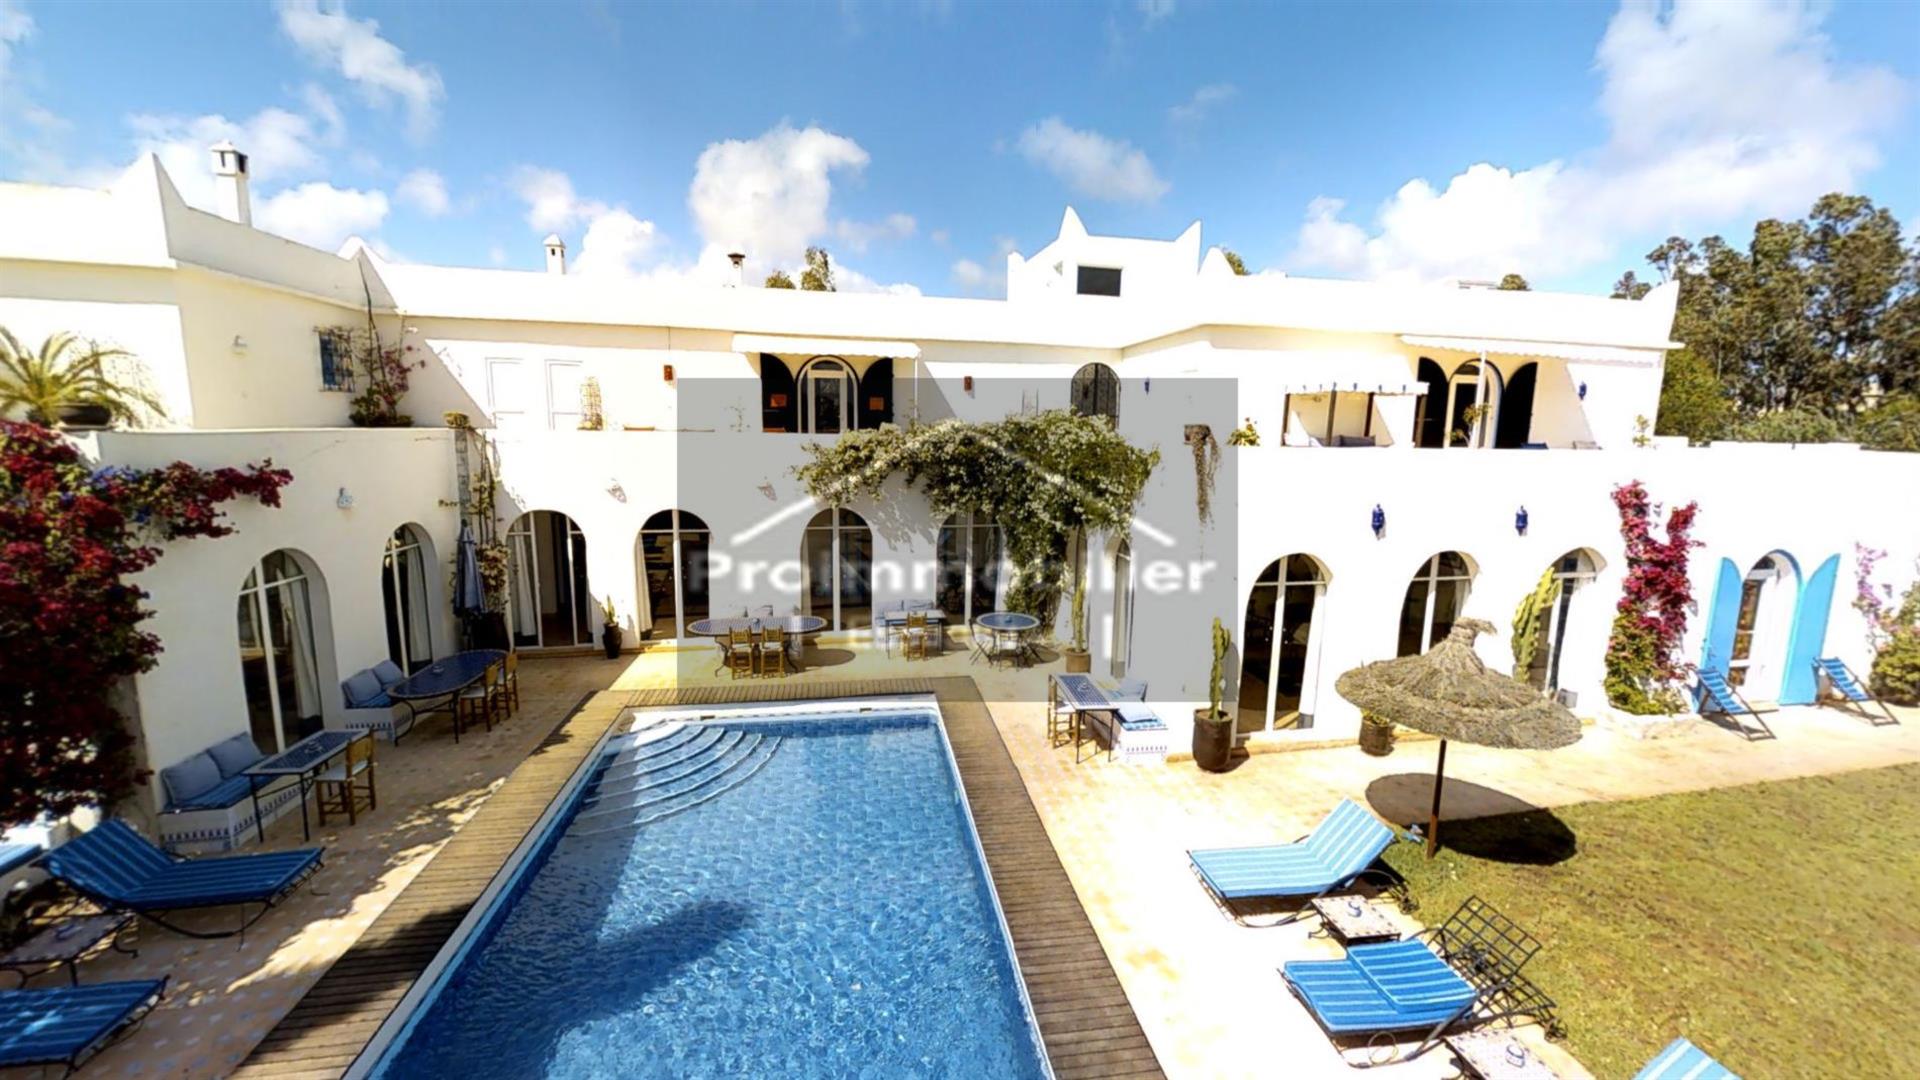 24-04-03-Vmh Beautiful Guest House of 750 m²for sale in Essaouira Garden 4989m²